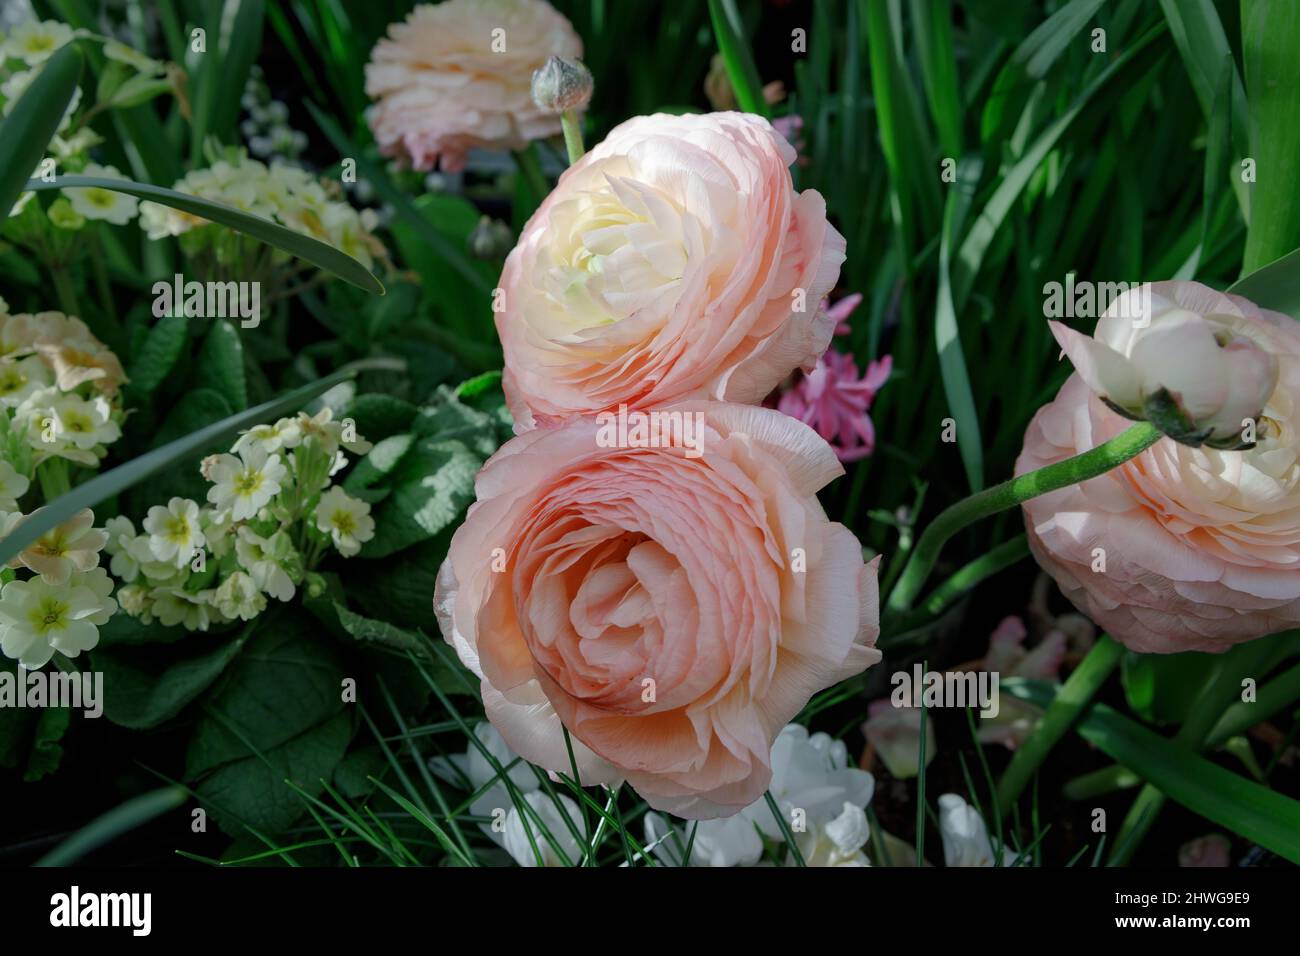 Ranunculus asiaticus or Persian buttercup Pink flower. Ranunculus is good spring choice for borders, pots and containers Stock Photo